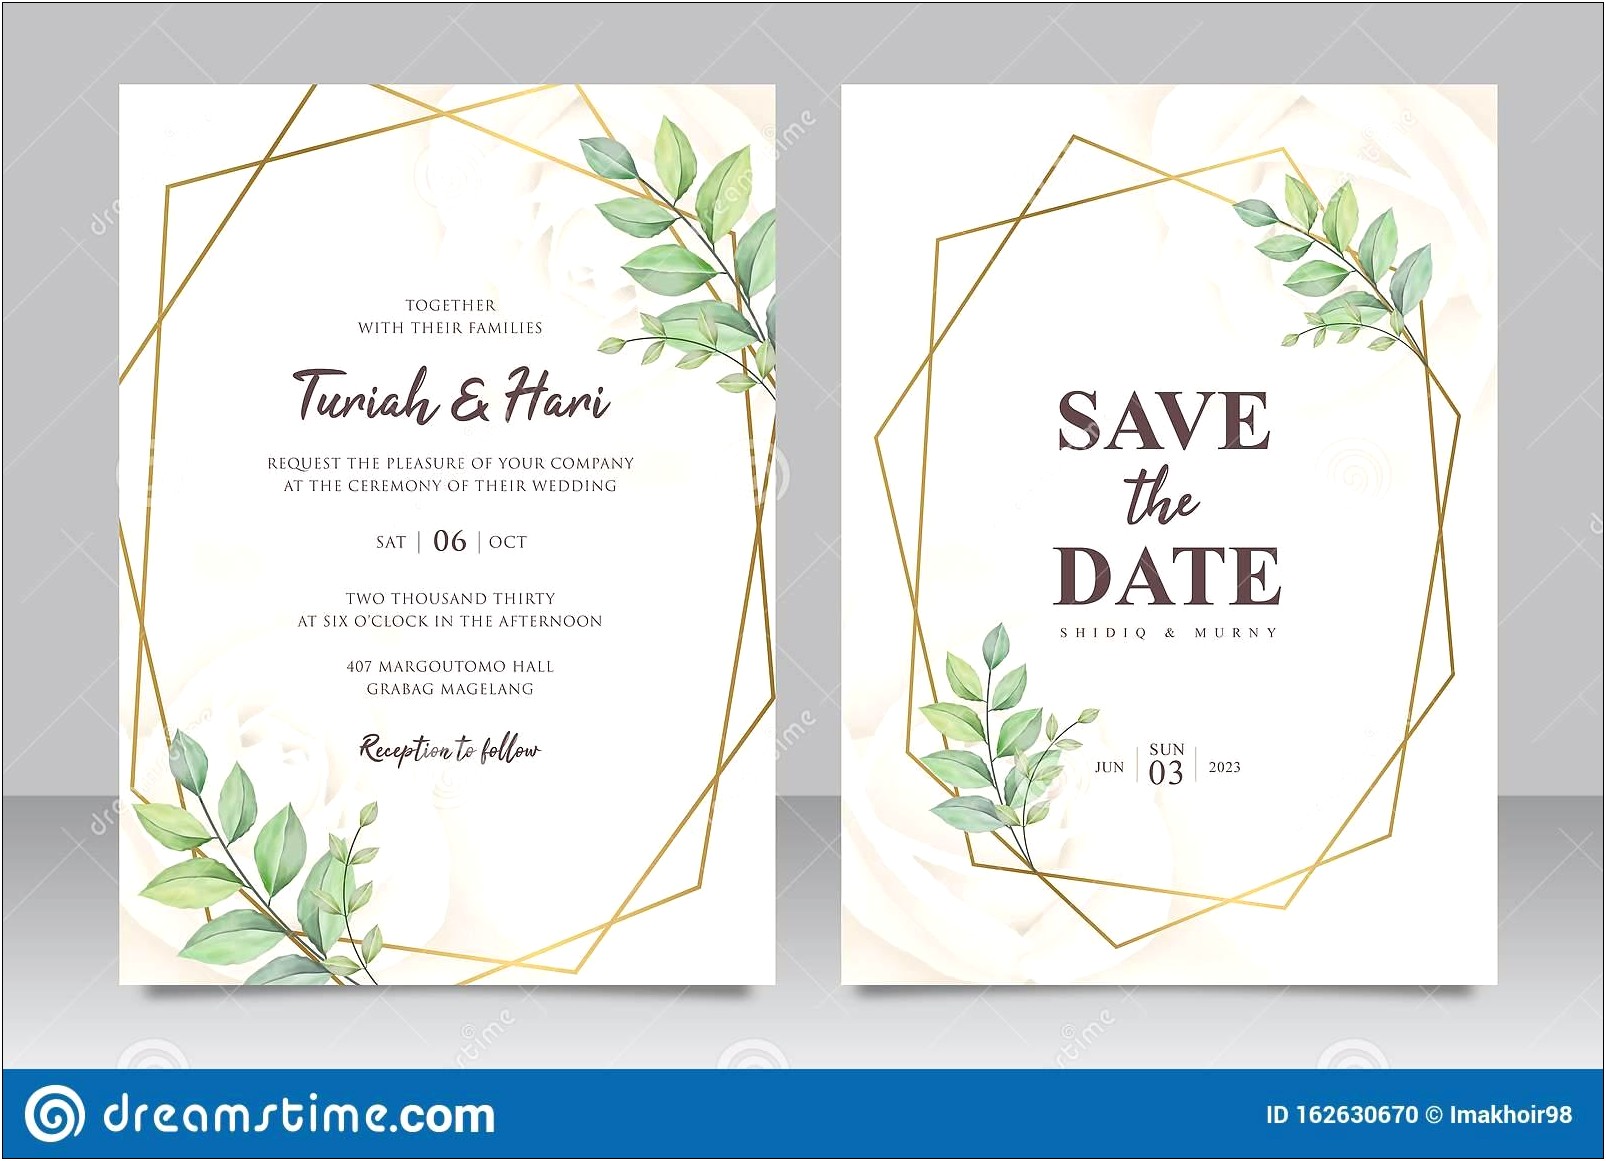 Free Save The Date Templates Geometric Business